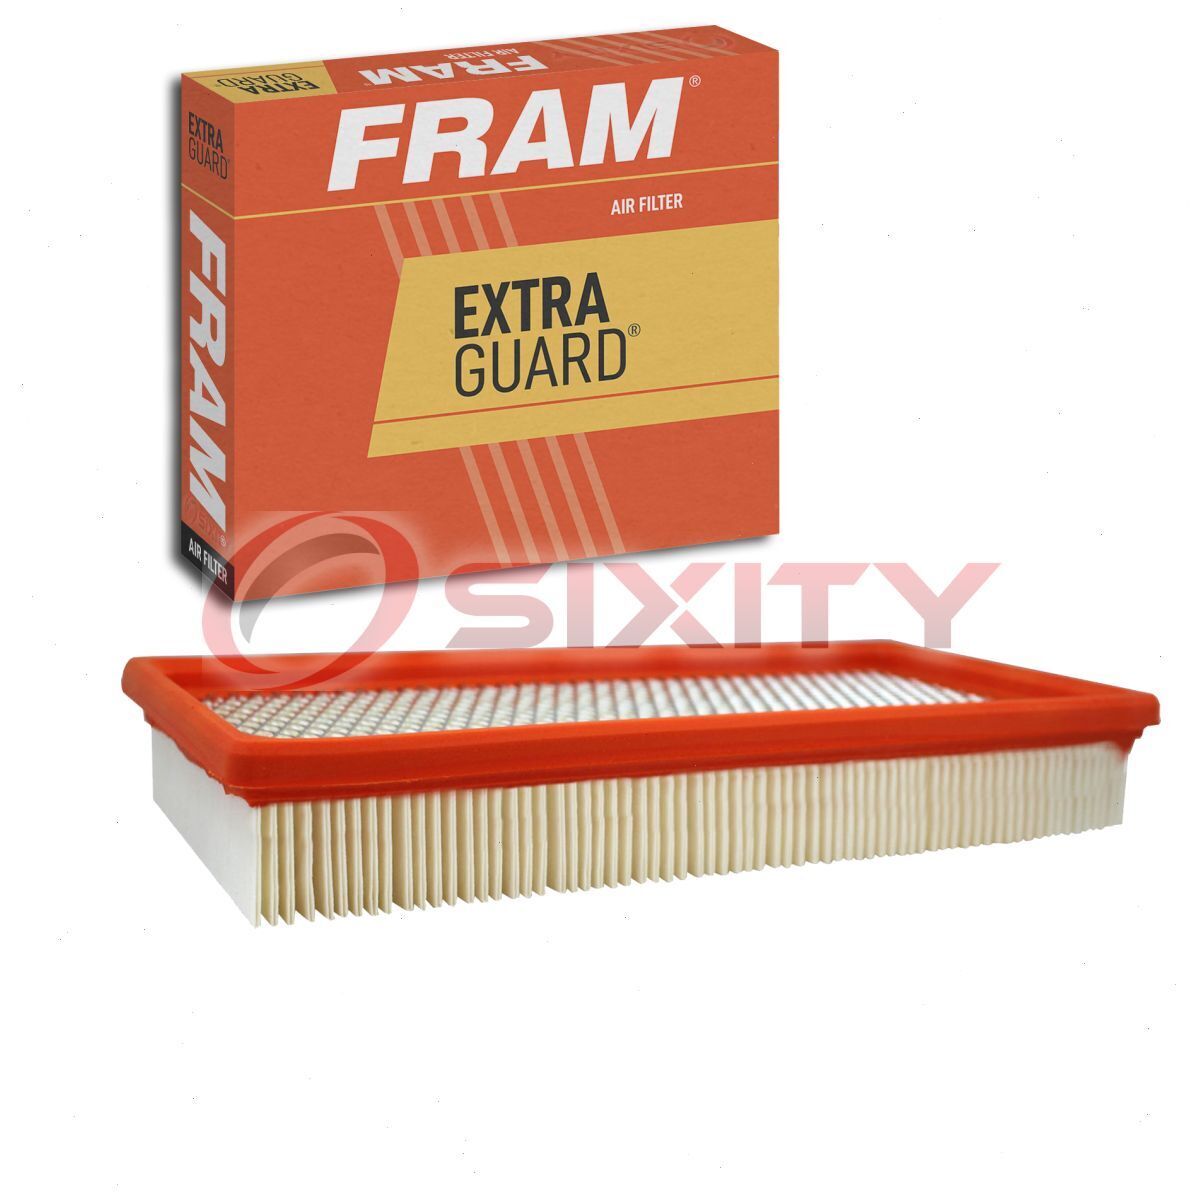 FRAM Extra Guard Air Filter for 1992-1994 Dodge Shadow Intake Inlet Manifold pg